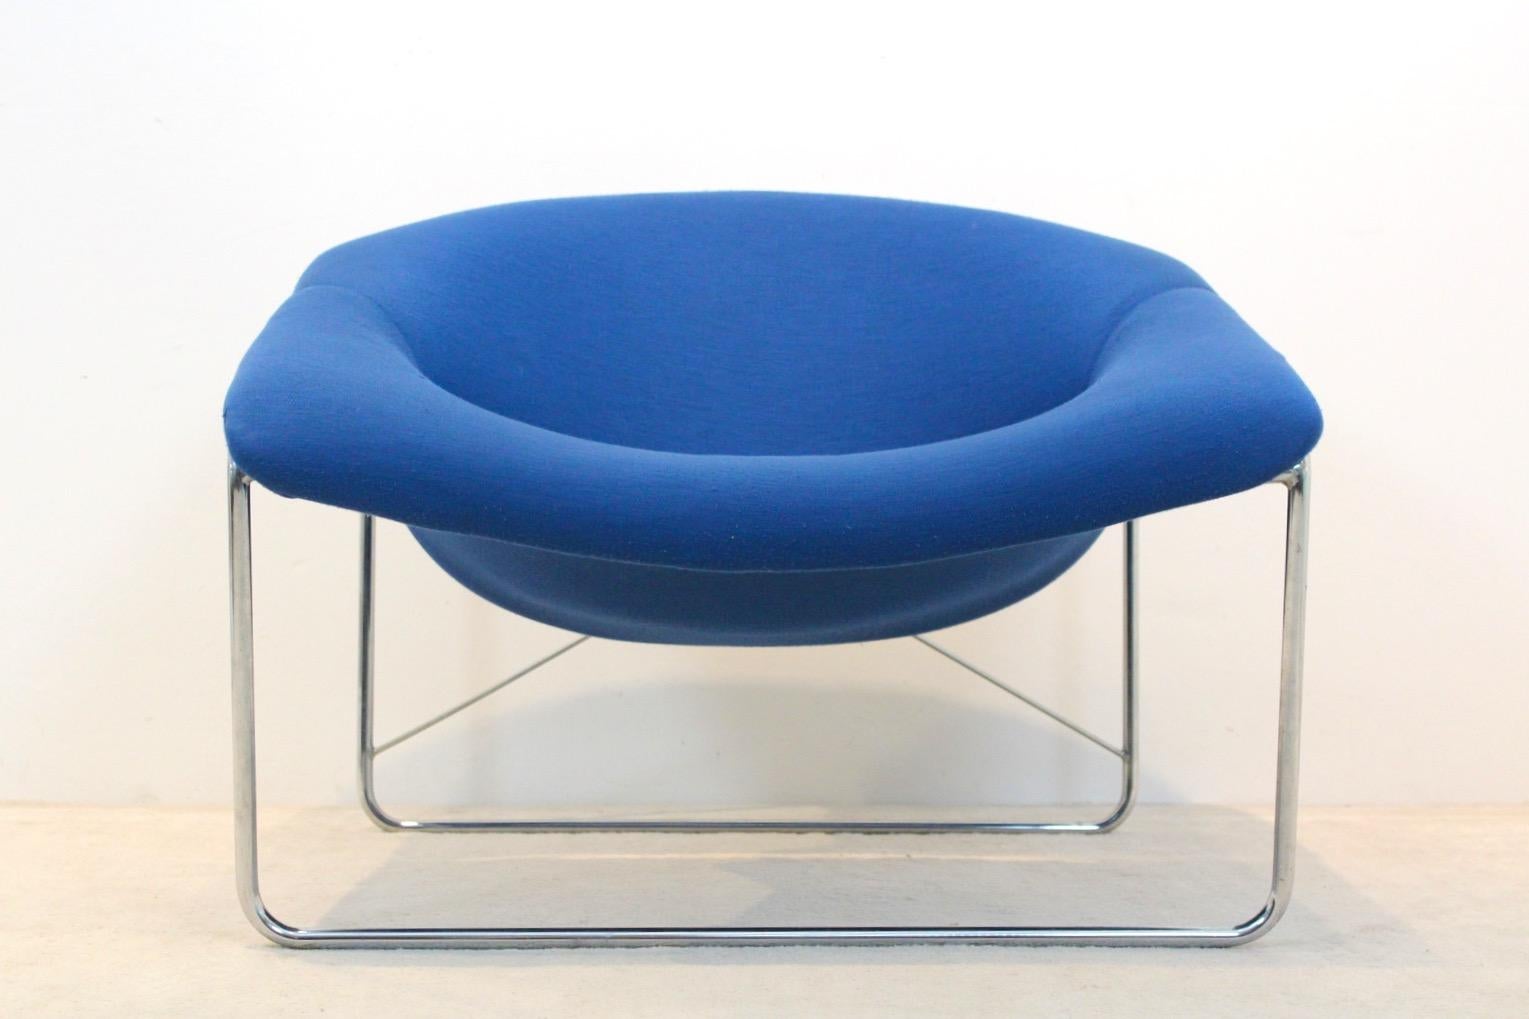 Iconic 'Cubique' chair designed by Olivier Mourgue for Airborne International, France 1968. The chair has a chromed tubular steel construction supporting a wire frame upholstered in blue jersey fabric. Wear consistent with age and use. The fabric is